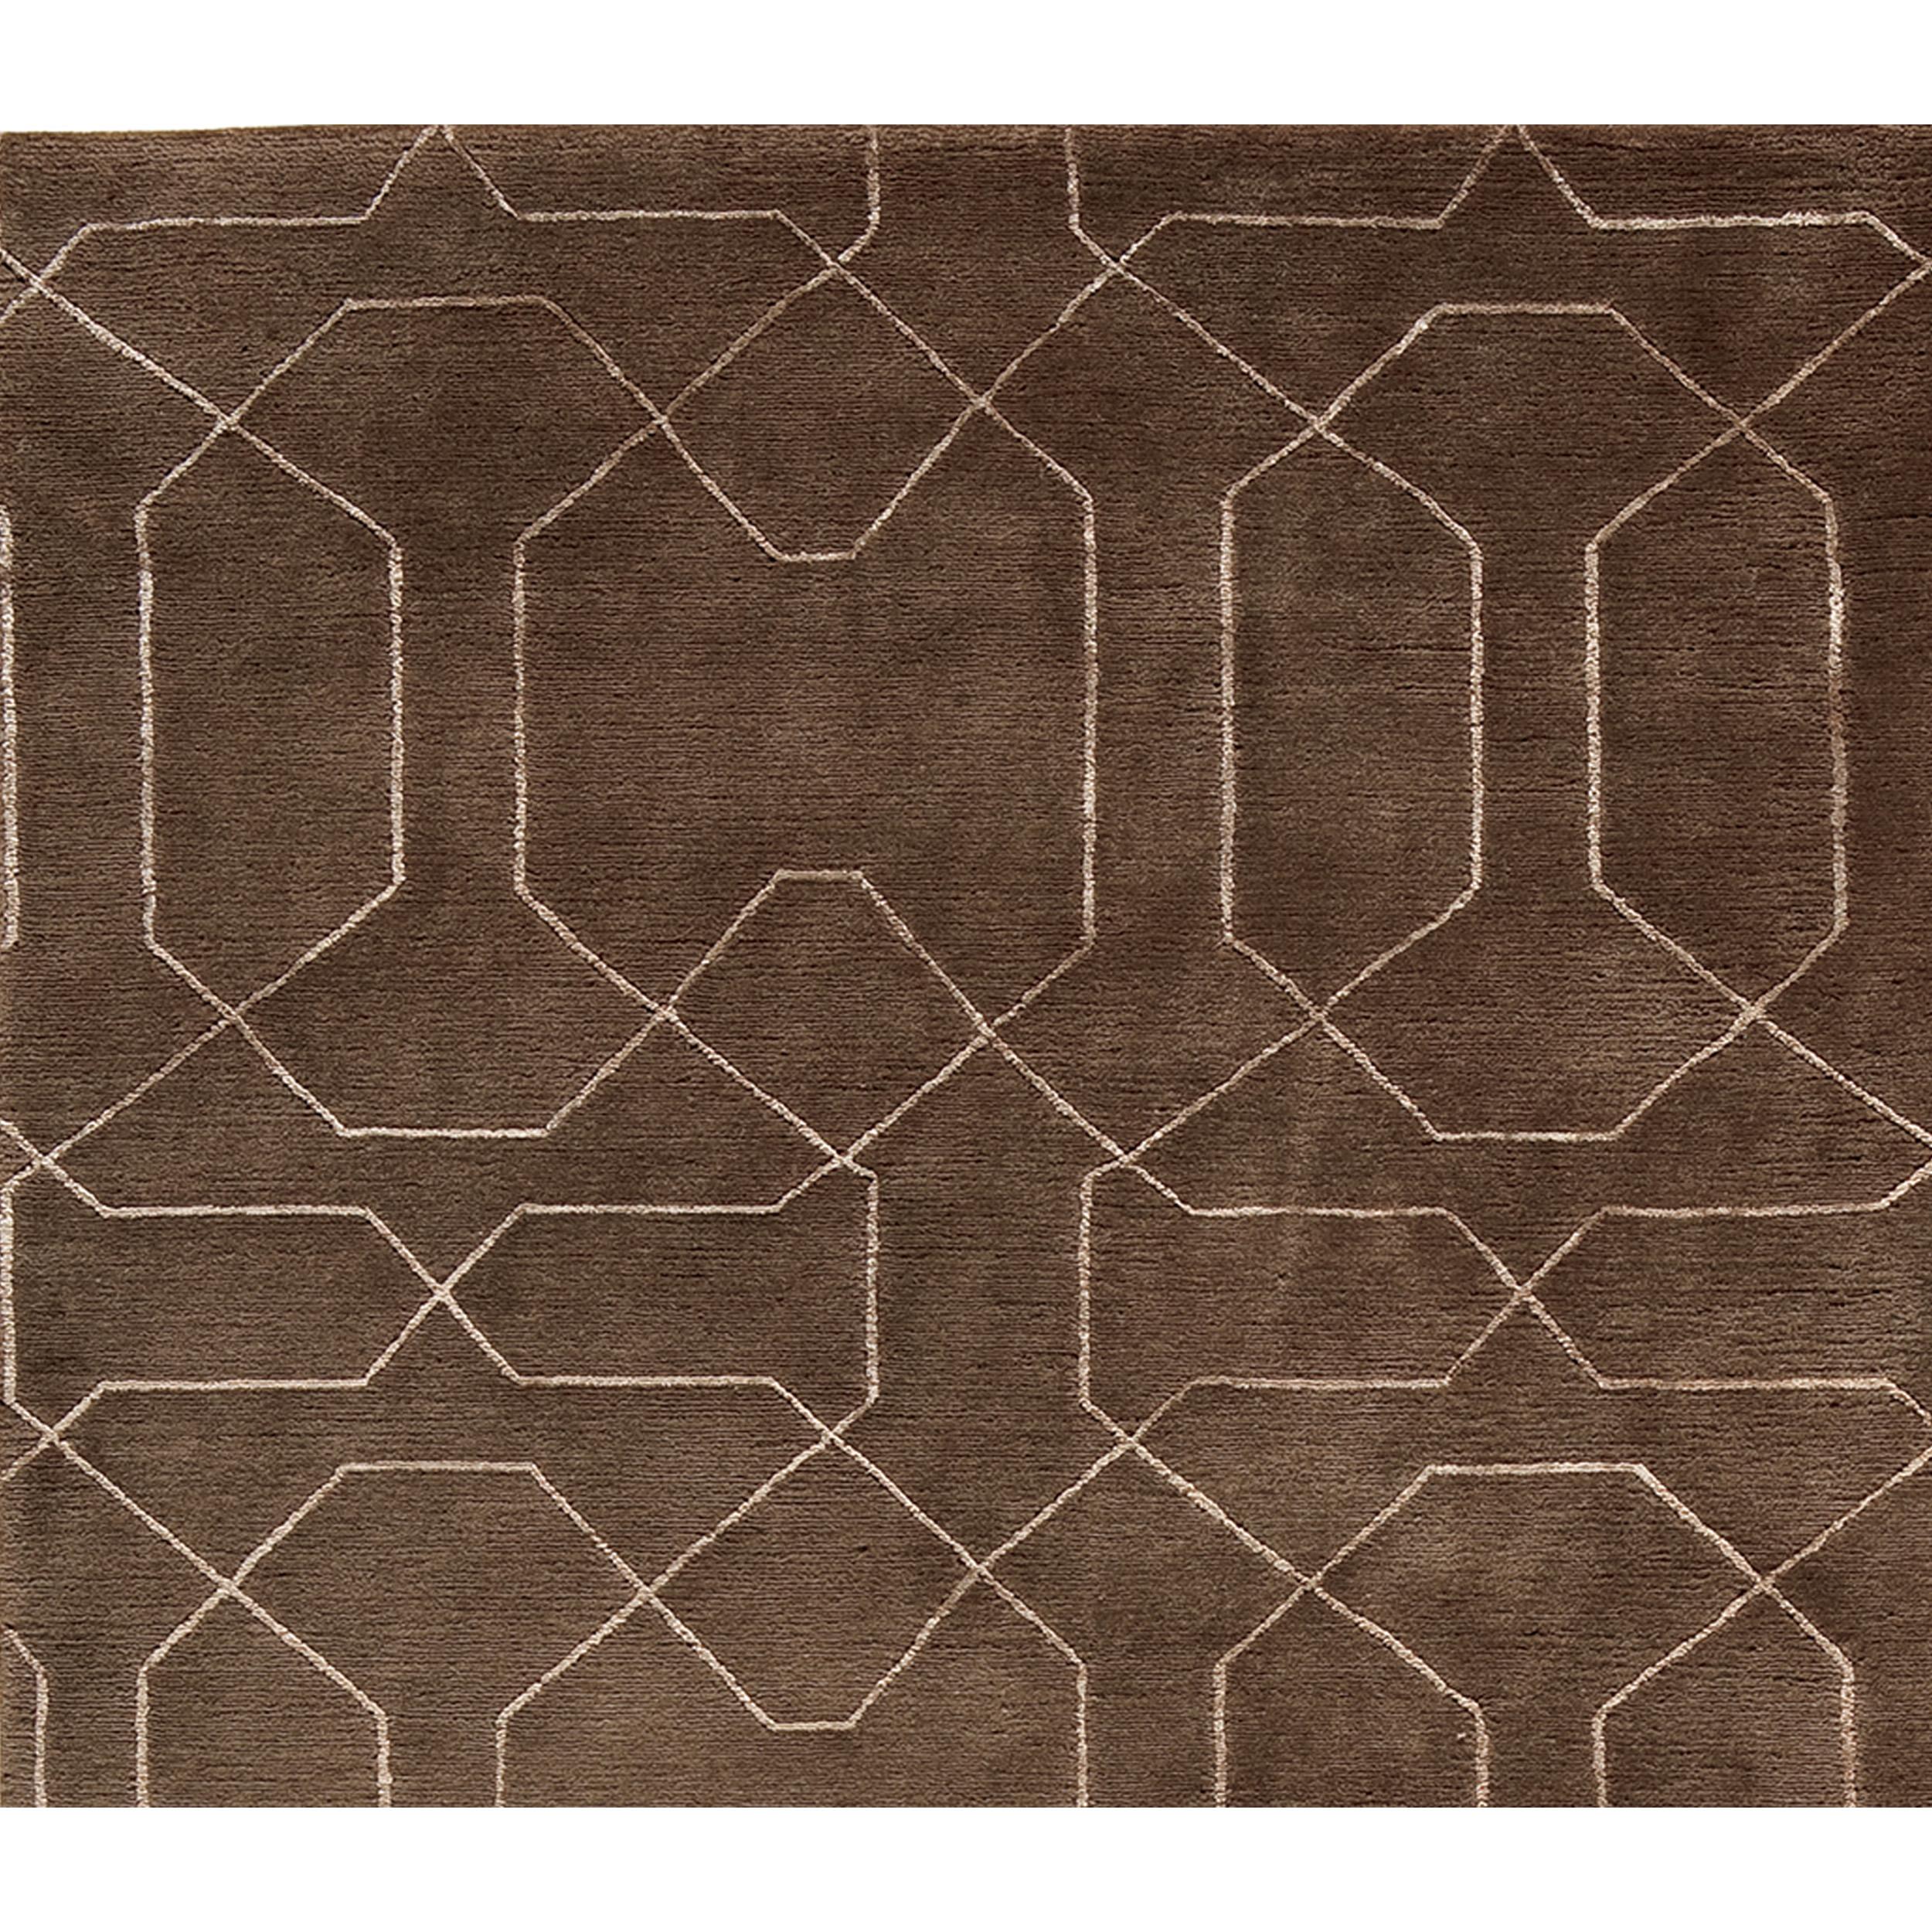 This exquisite modern hand-knotted rug from India offers a delightful sensory experience, captivating both touch and sight with its luscious hand-loomed design. A unique blend of wool and lustrous viscose creates a surface that is not only